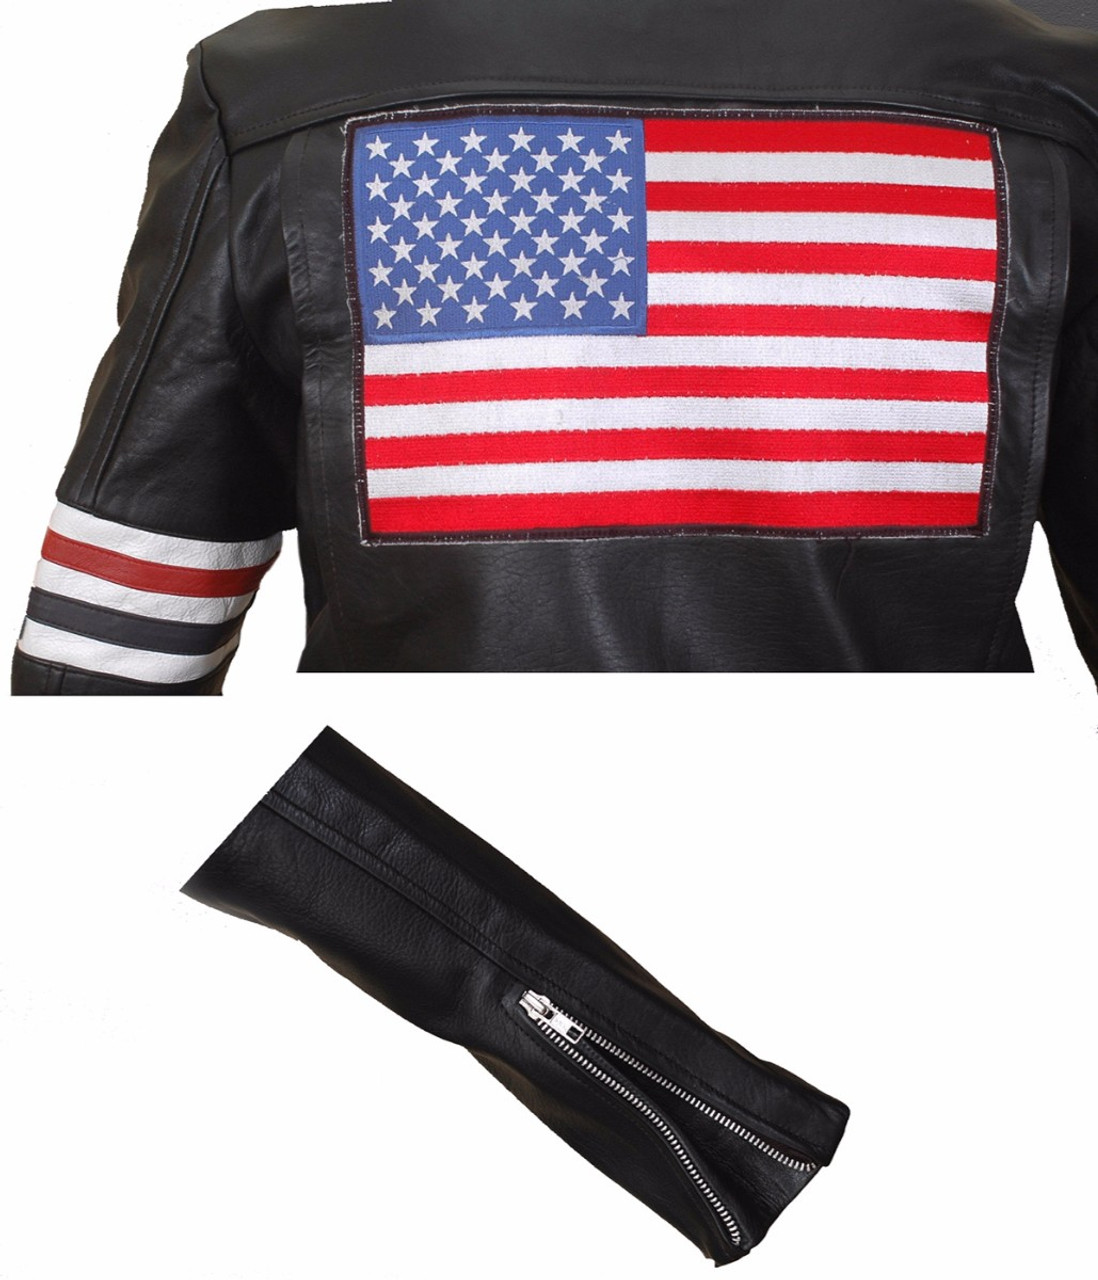 Easy Rider Peter Fonda Captain America Leather Jacket | Feather Skin